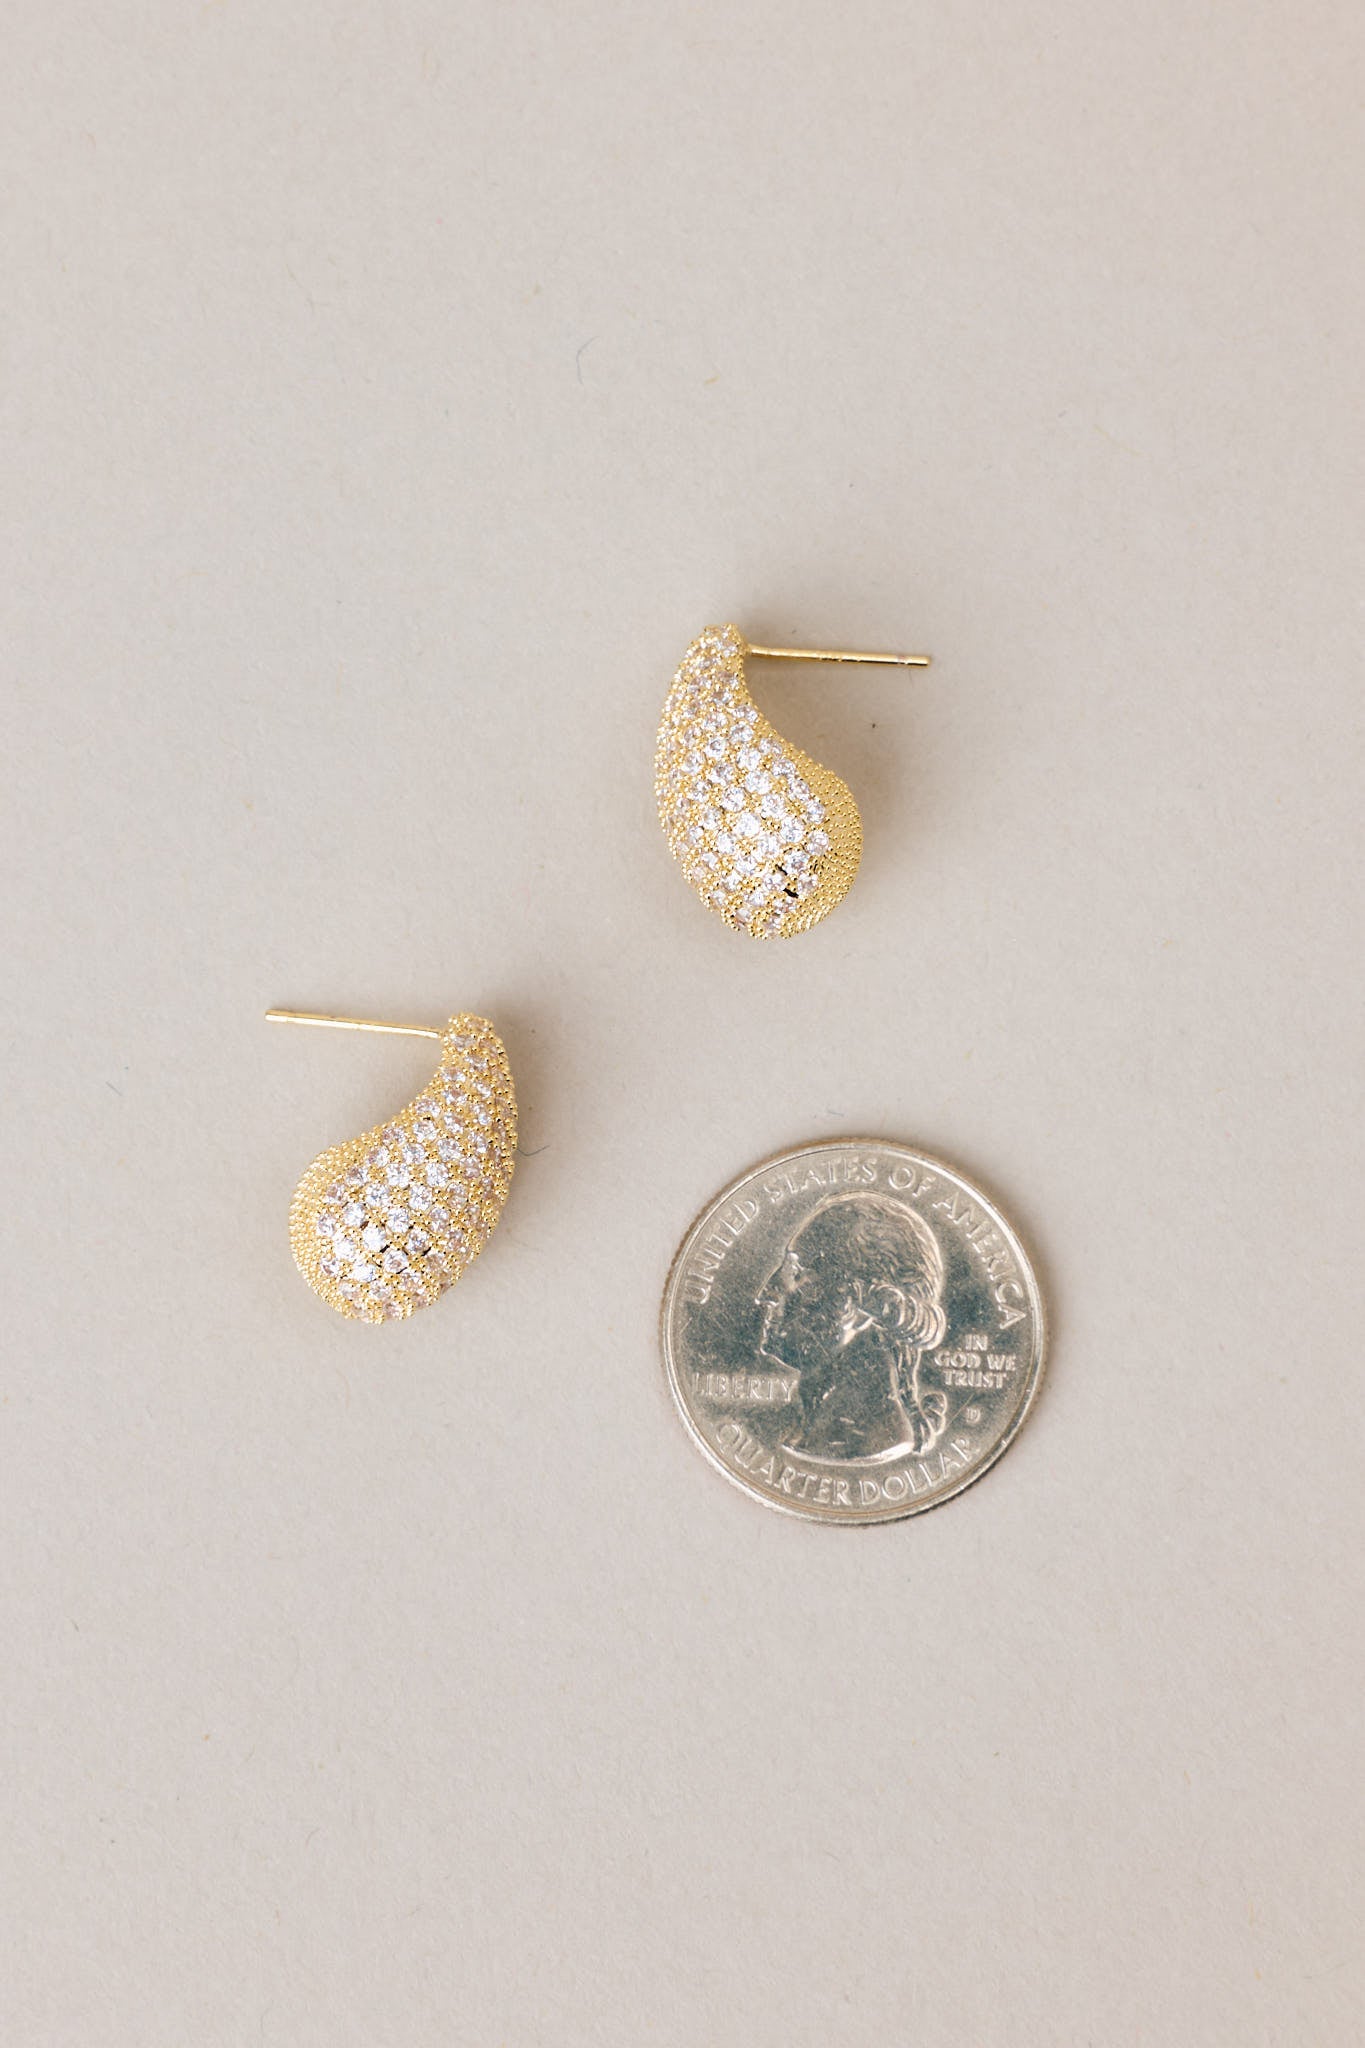 Size comparison of a quarter to these tear shaped yellow gold earring with mini rhinestones covering it, and gold hardware.